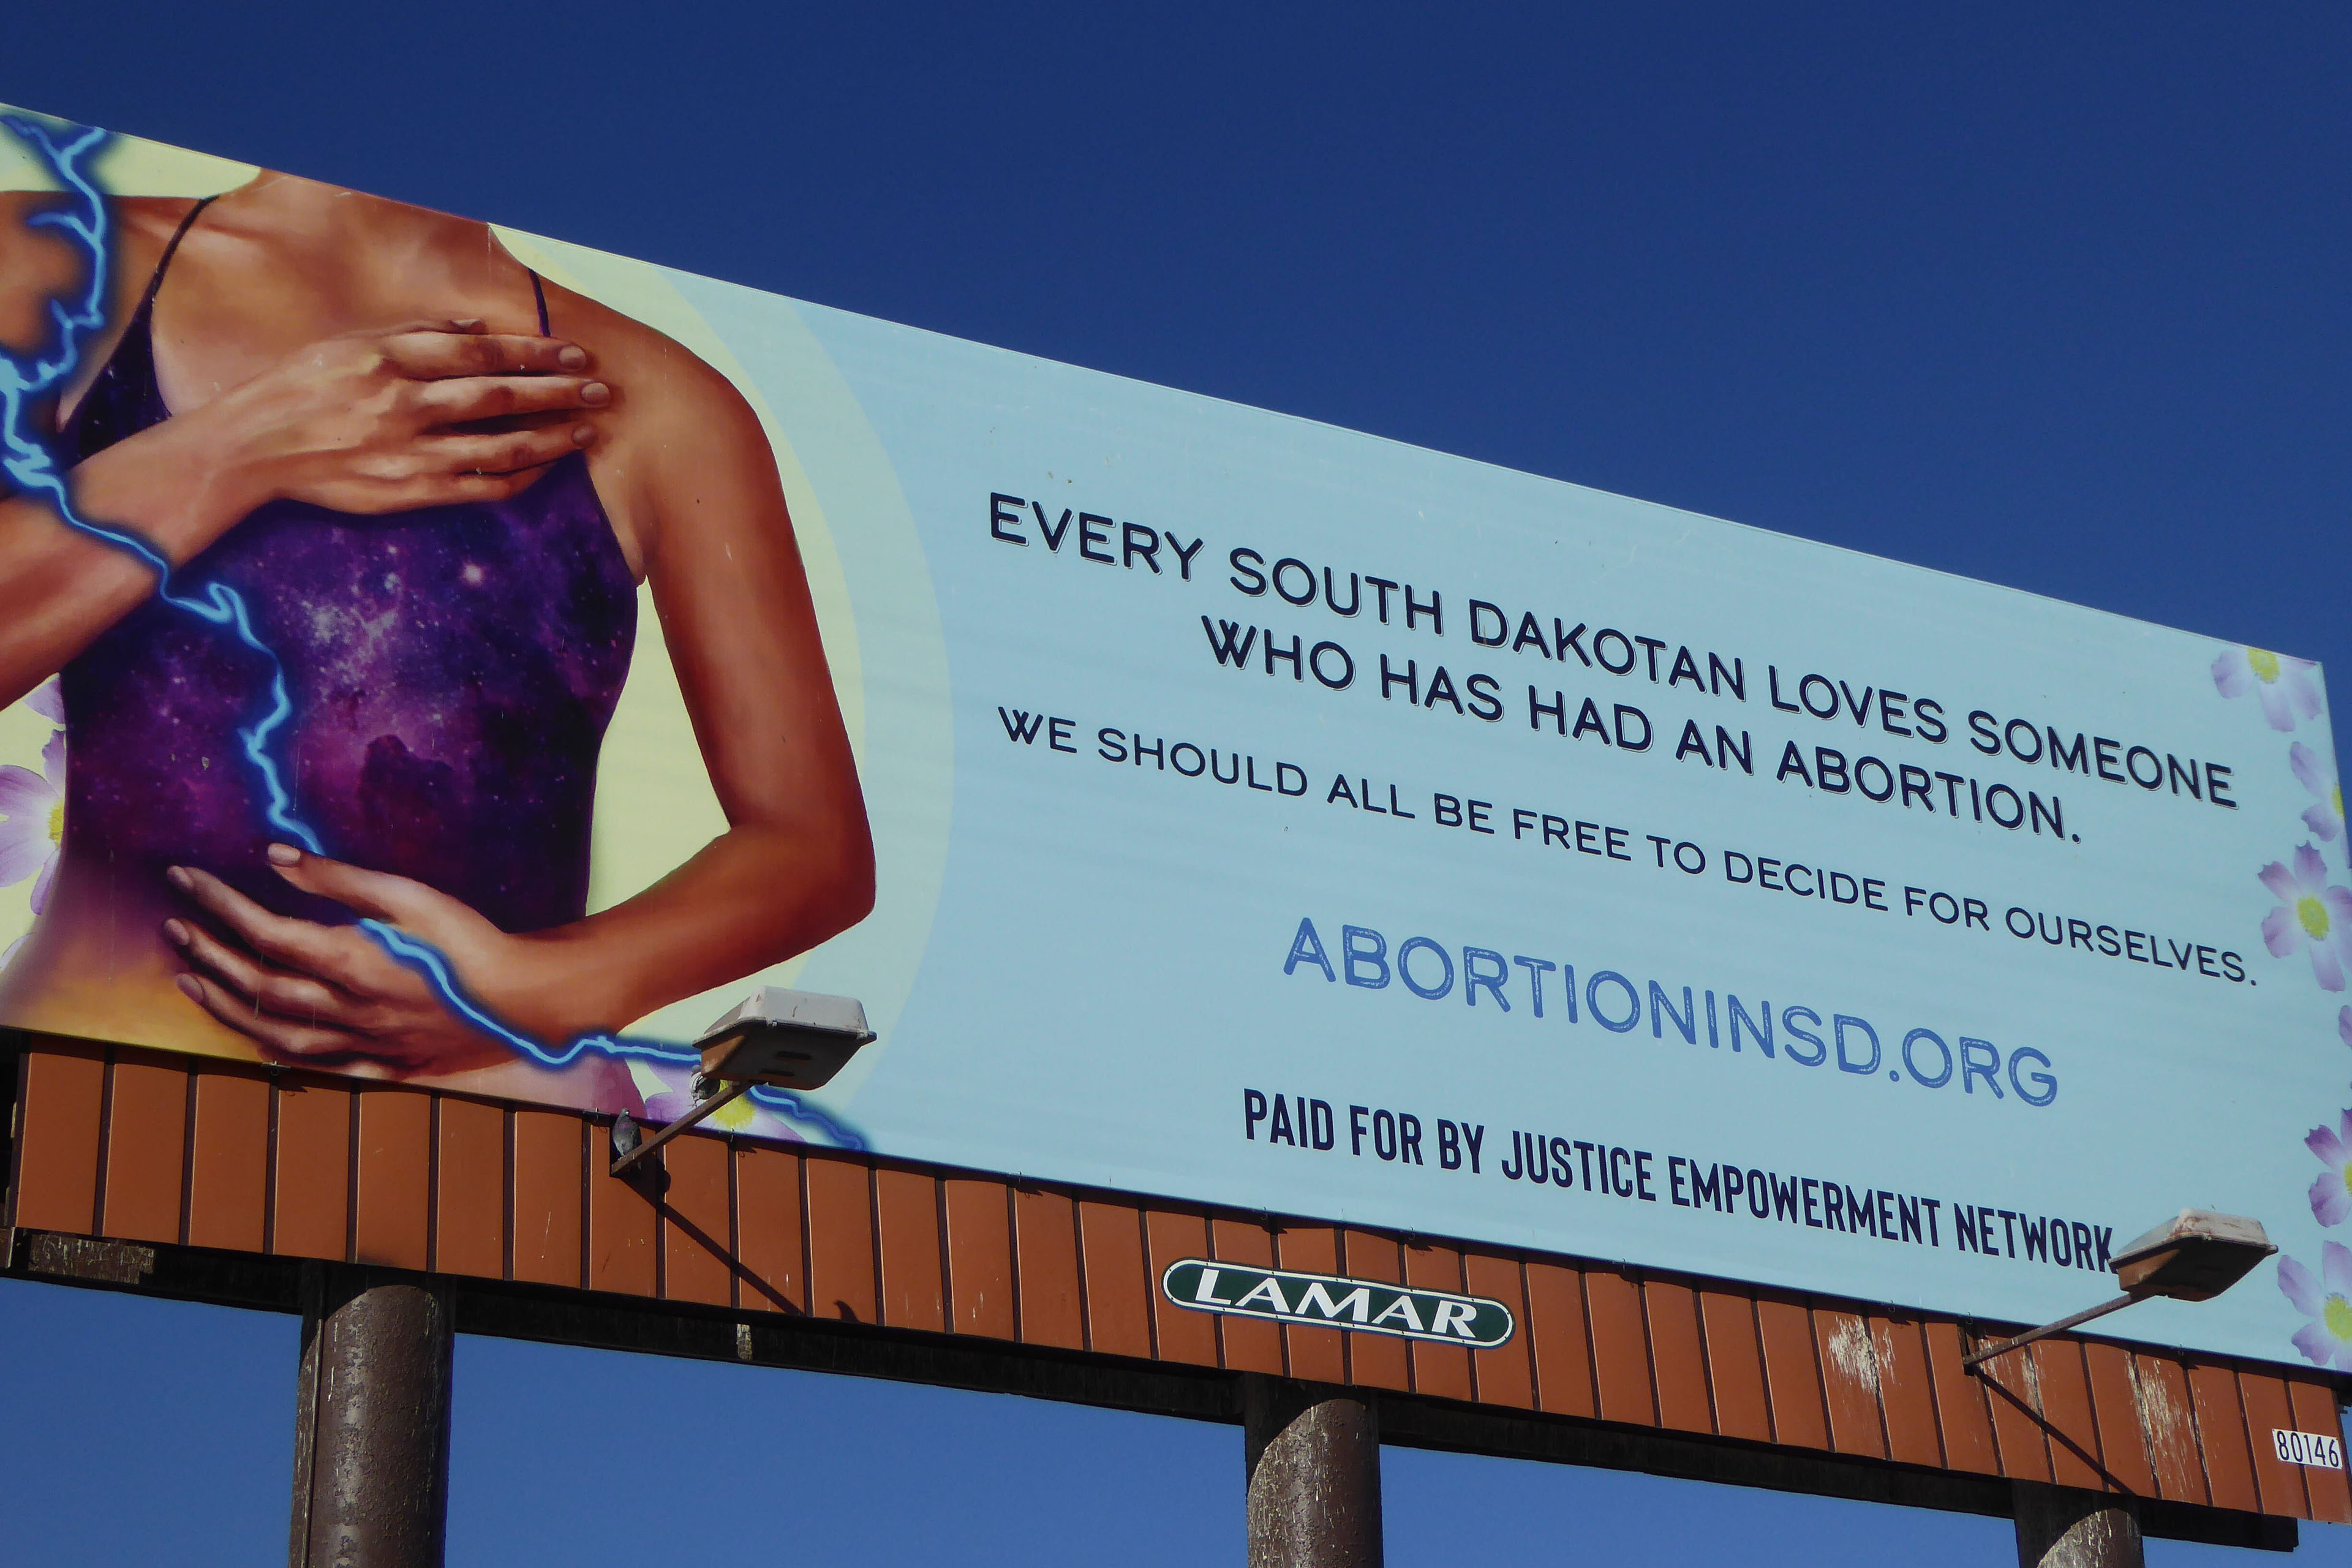 A pro-choice billboard by the Justice through Empowerment Network reads, "Every South Dakotan loves someone who had an abortion. / We should all be free to decide for ourselves."